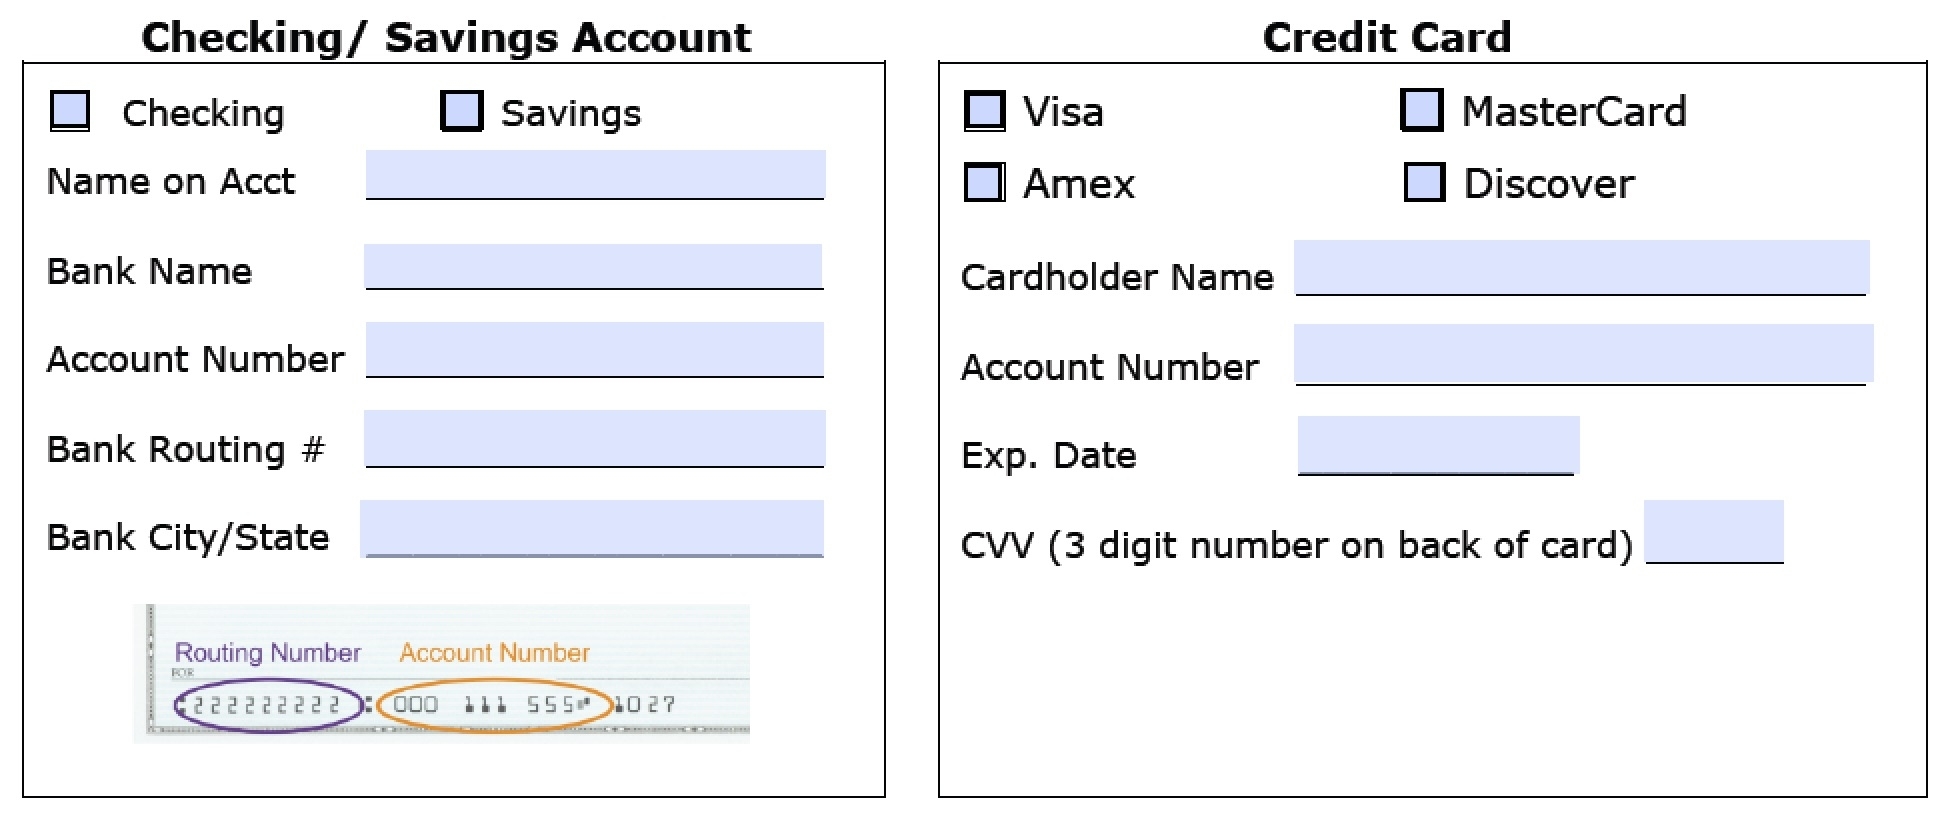 Download Recurring Payment Authorization Form Template | Credit Card Throughout Credit Card Billing Authorization Form Template